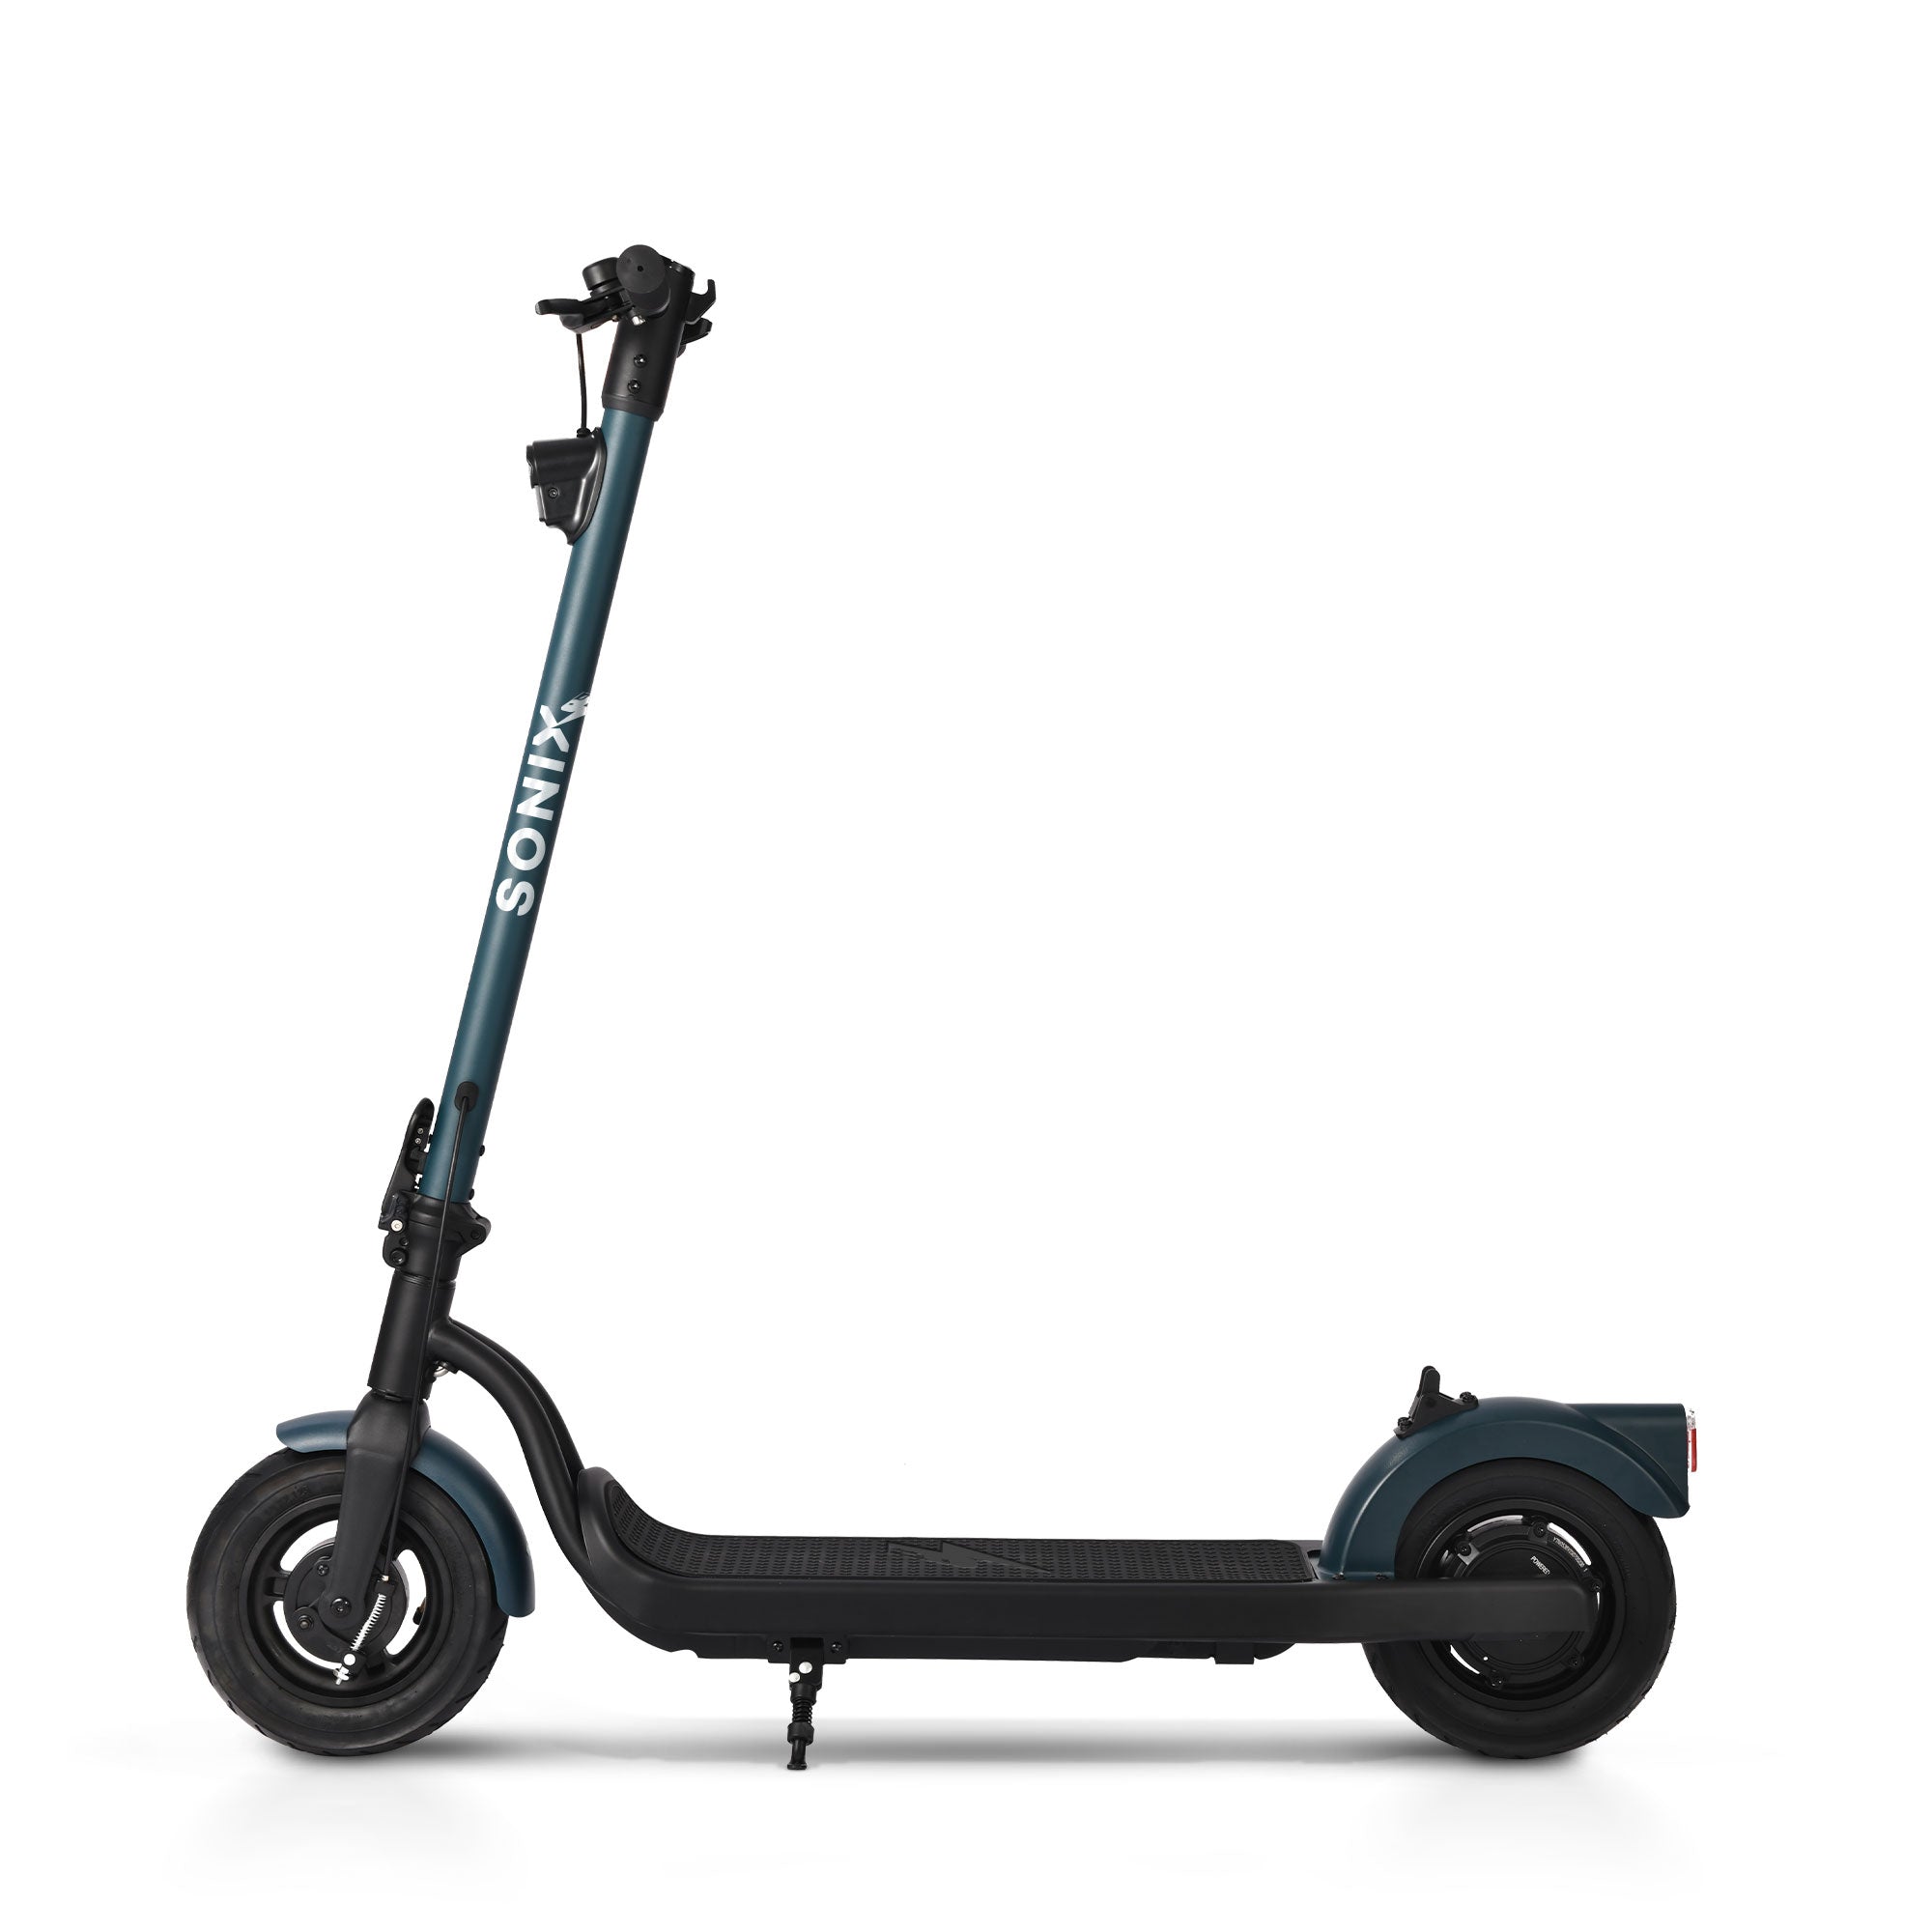 Sonix UrbanGlide - Portable Electric Scooter